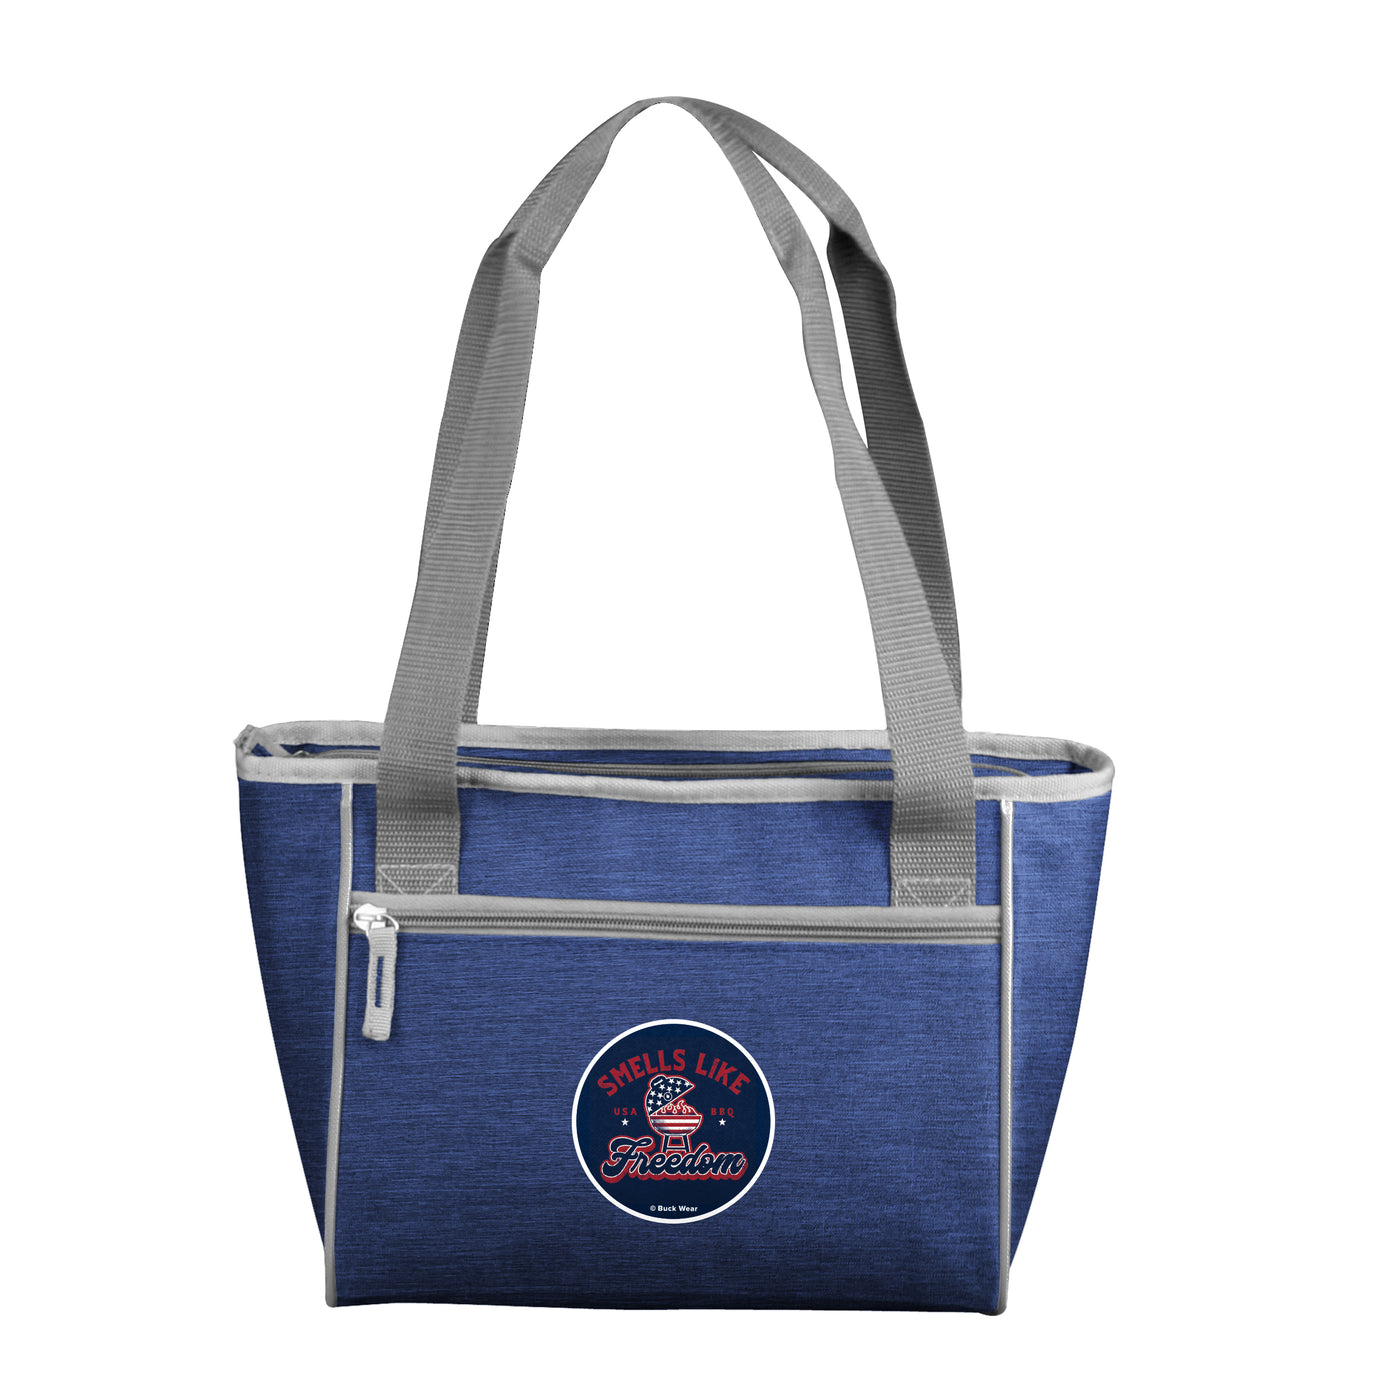 Smells Like Freedom 16 Can Cooler Tote